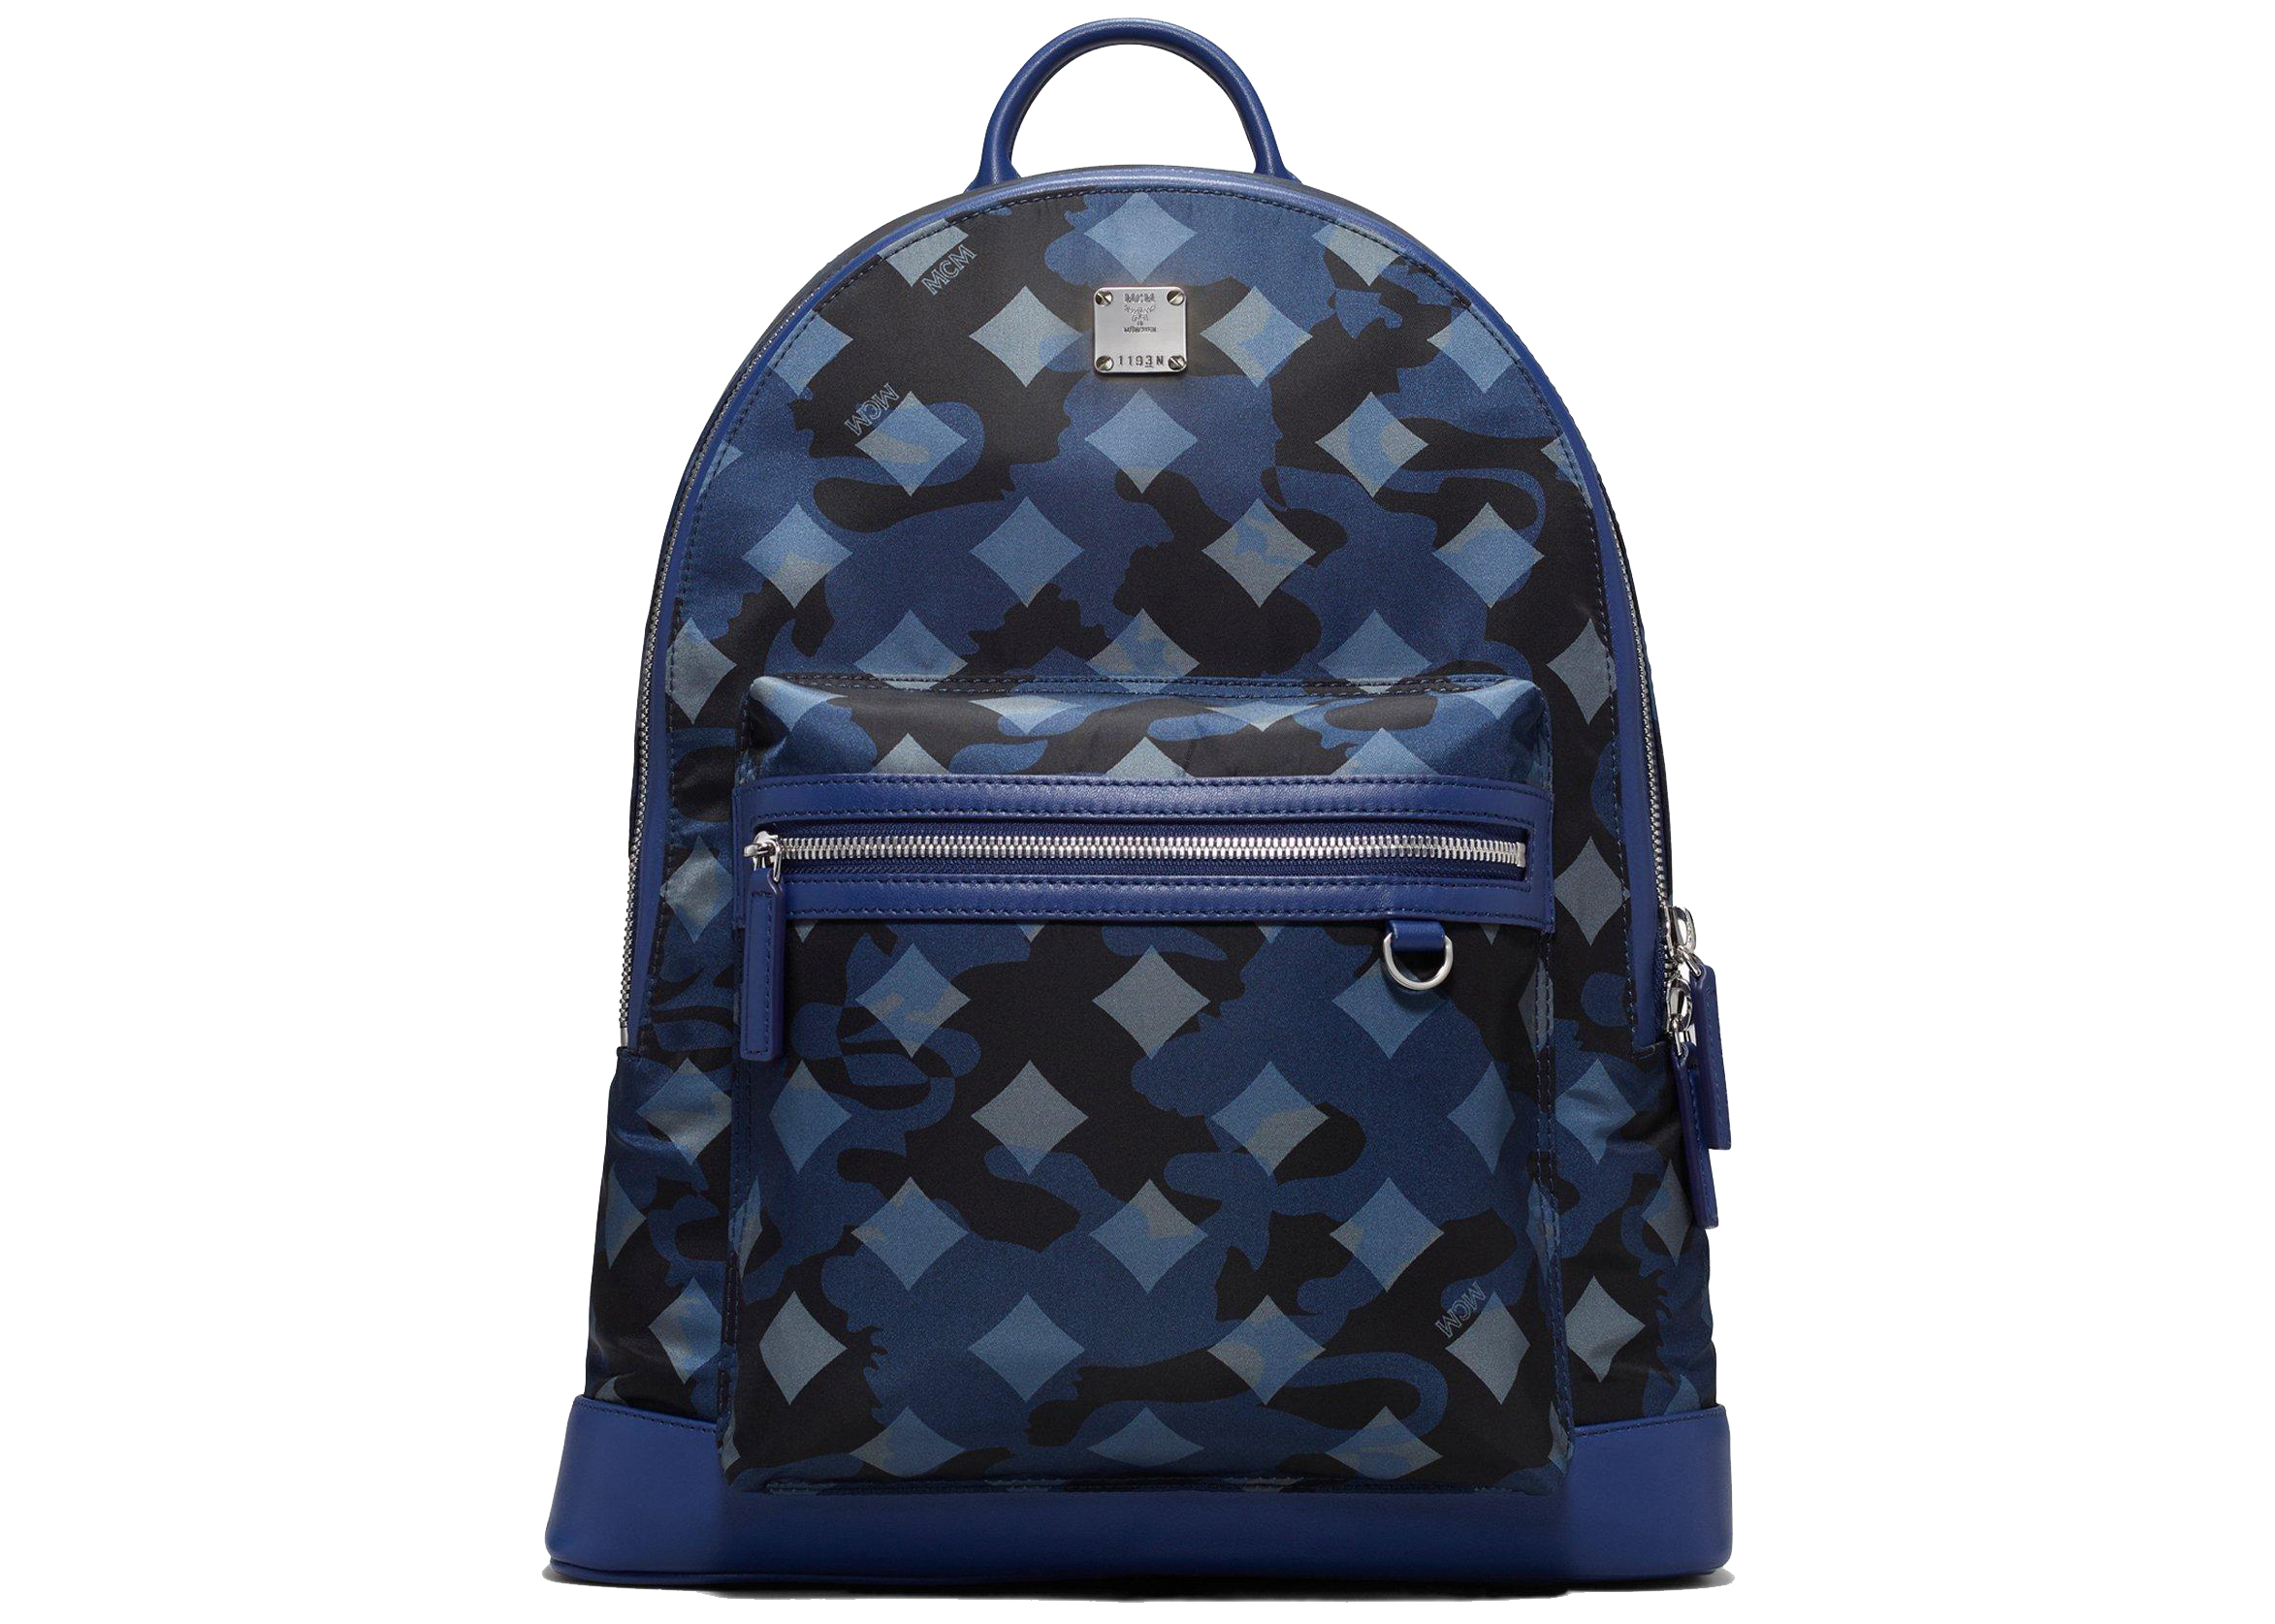 MCM Dieter Backpack Munich Large Lion Camo in Nylon with Cobalt ...